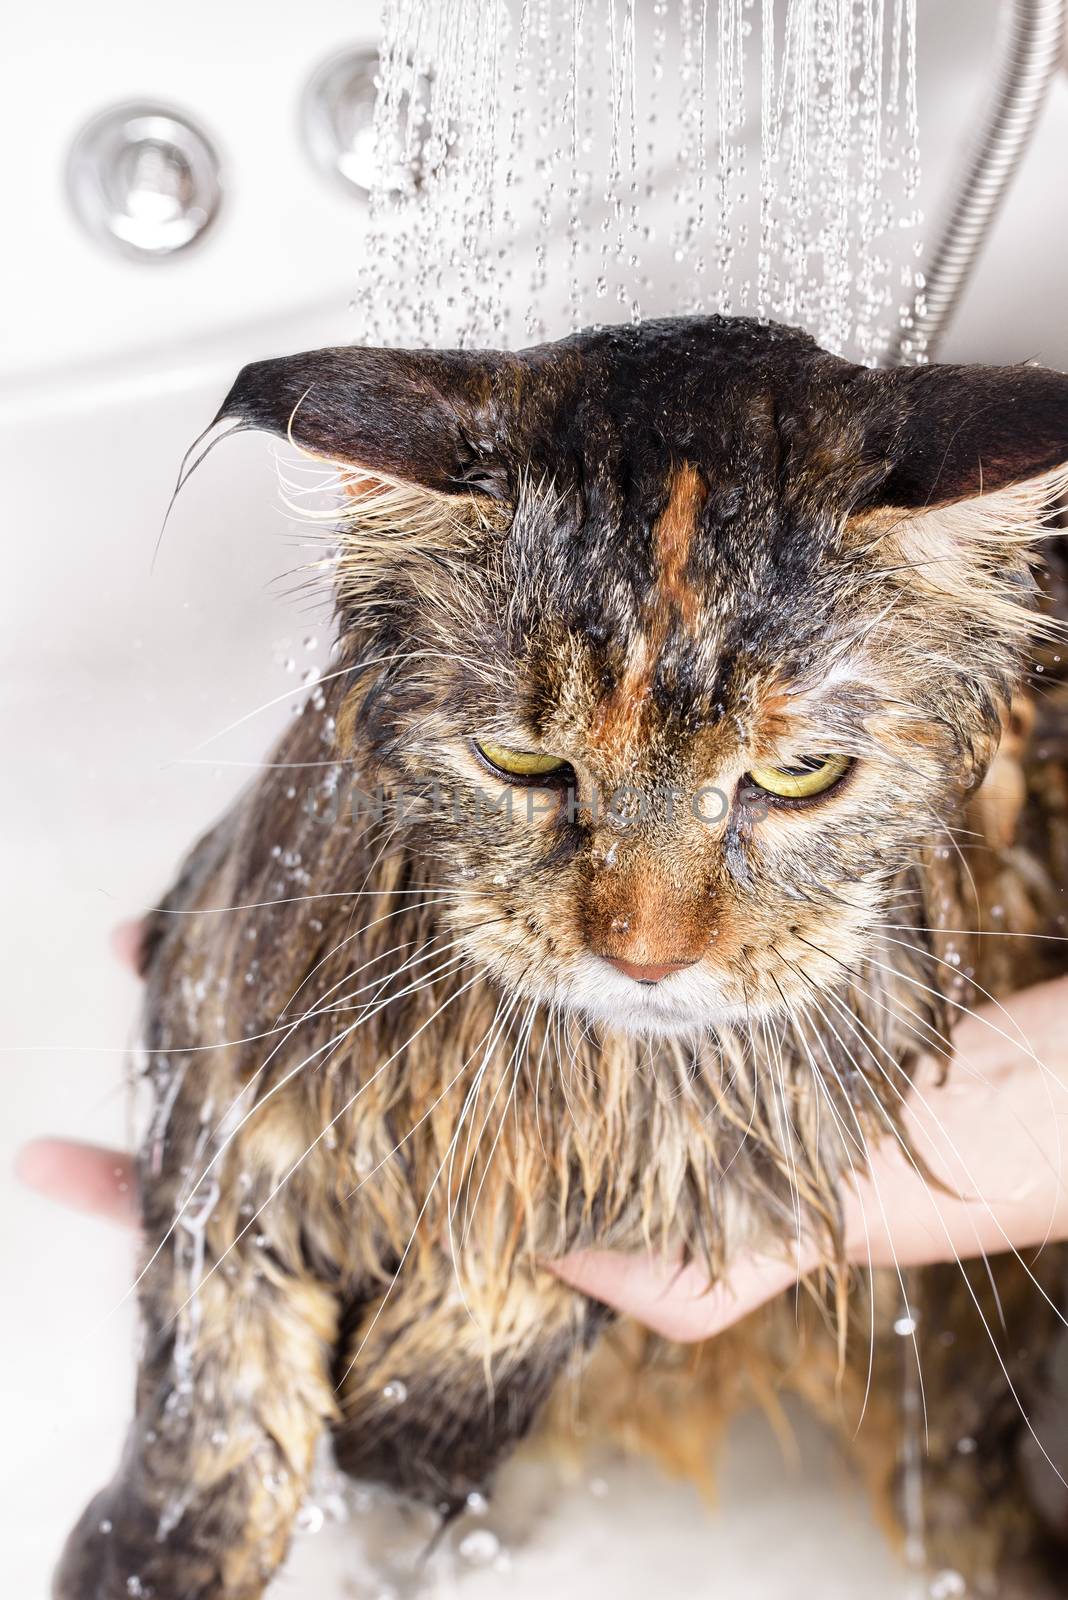 Wet cat. Girl washes cat in the bath